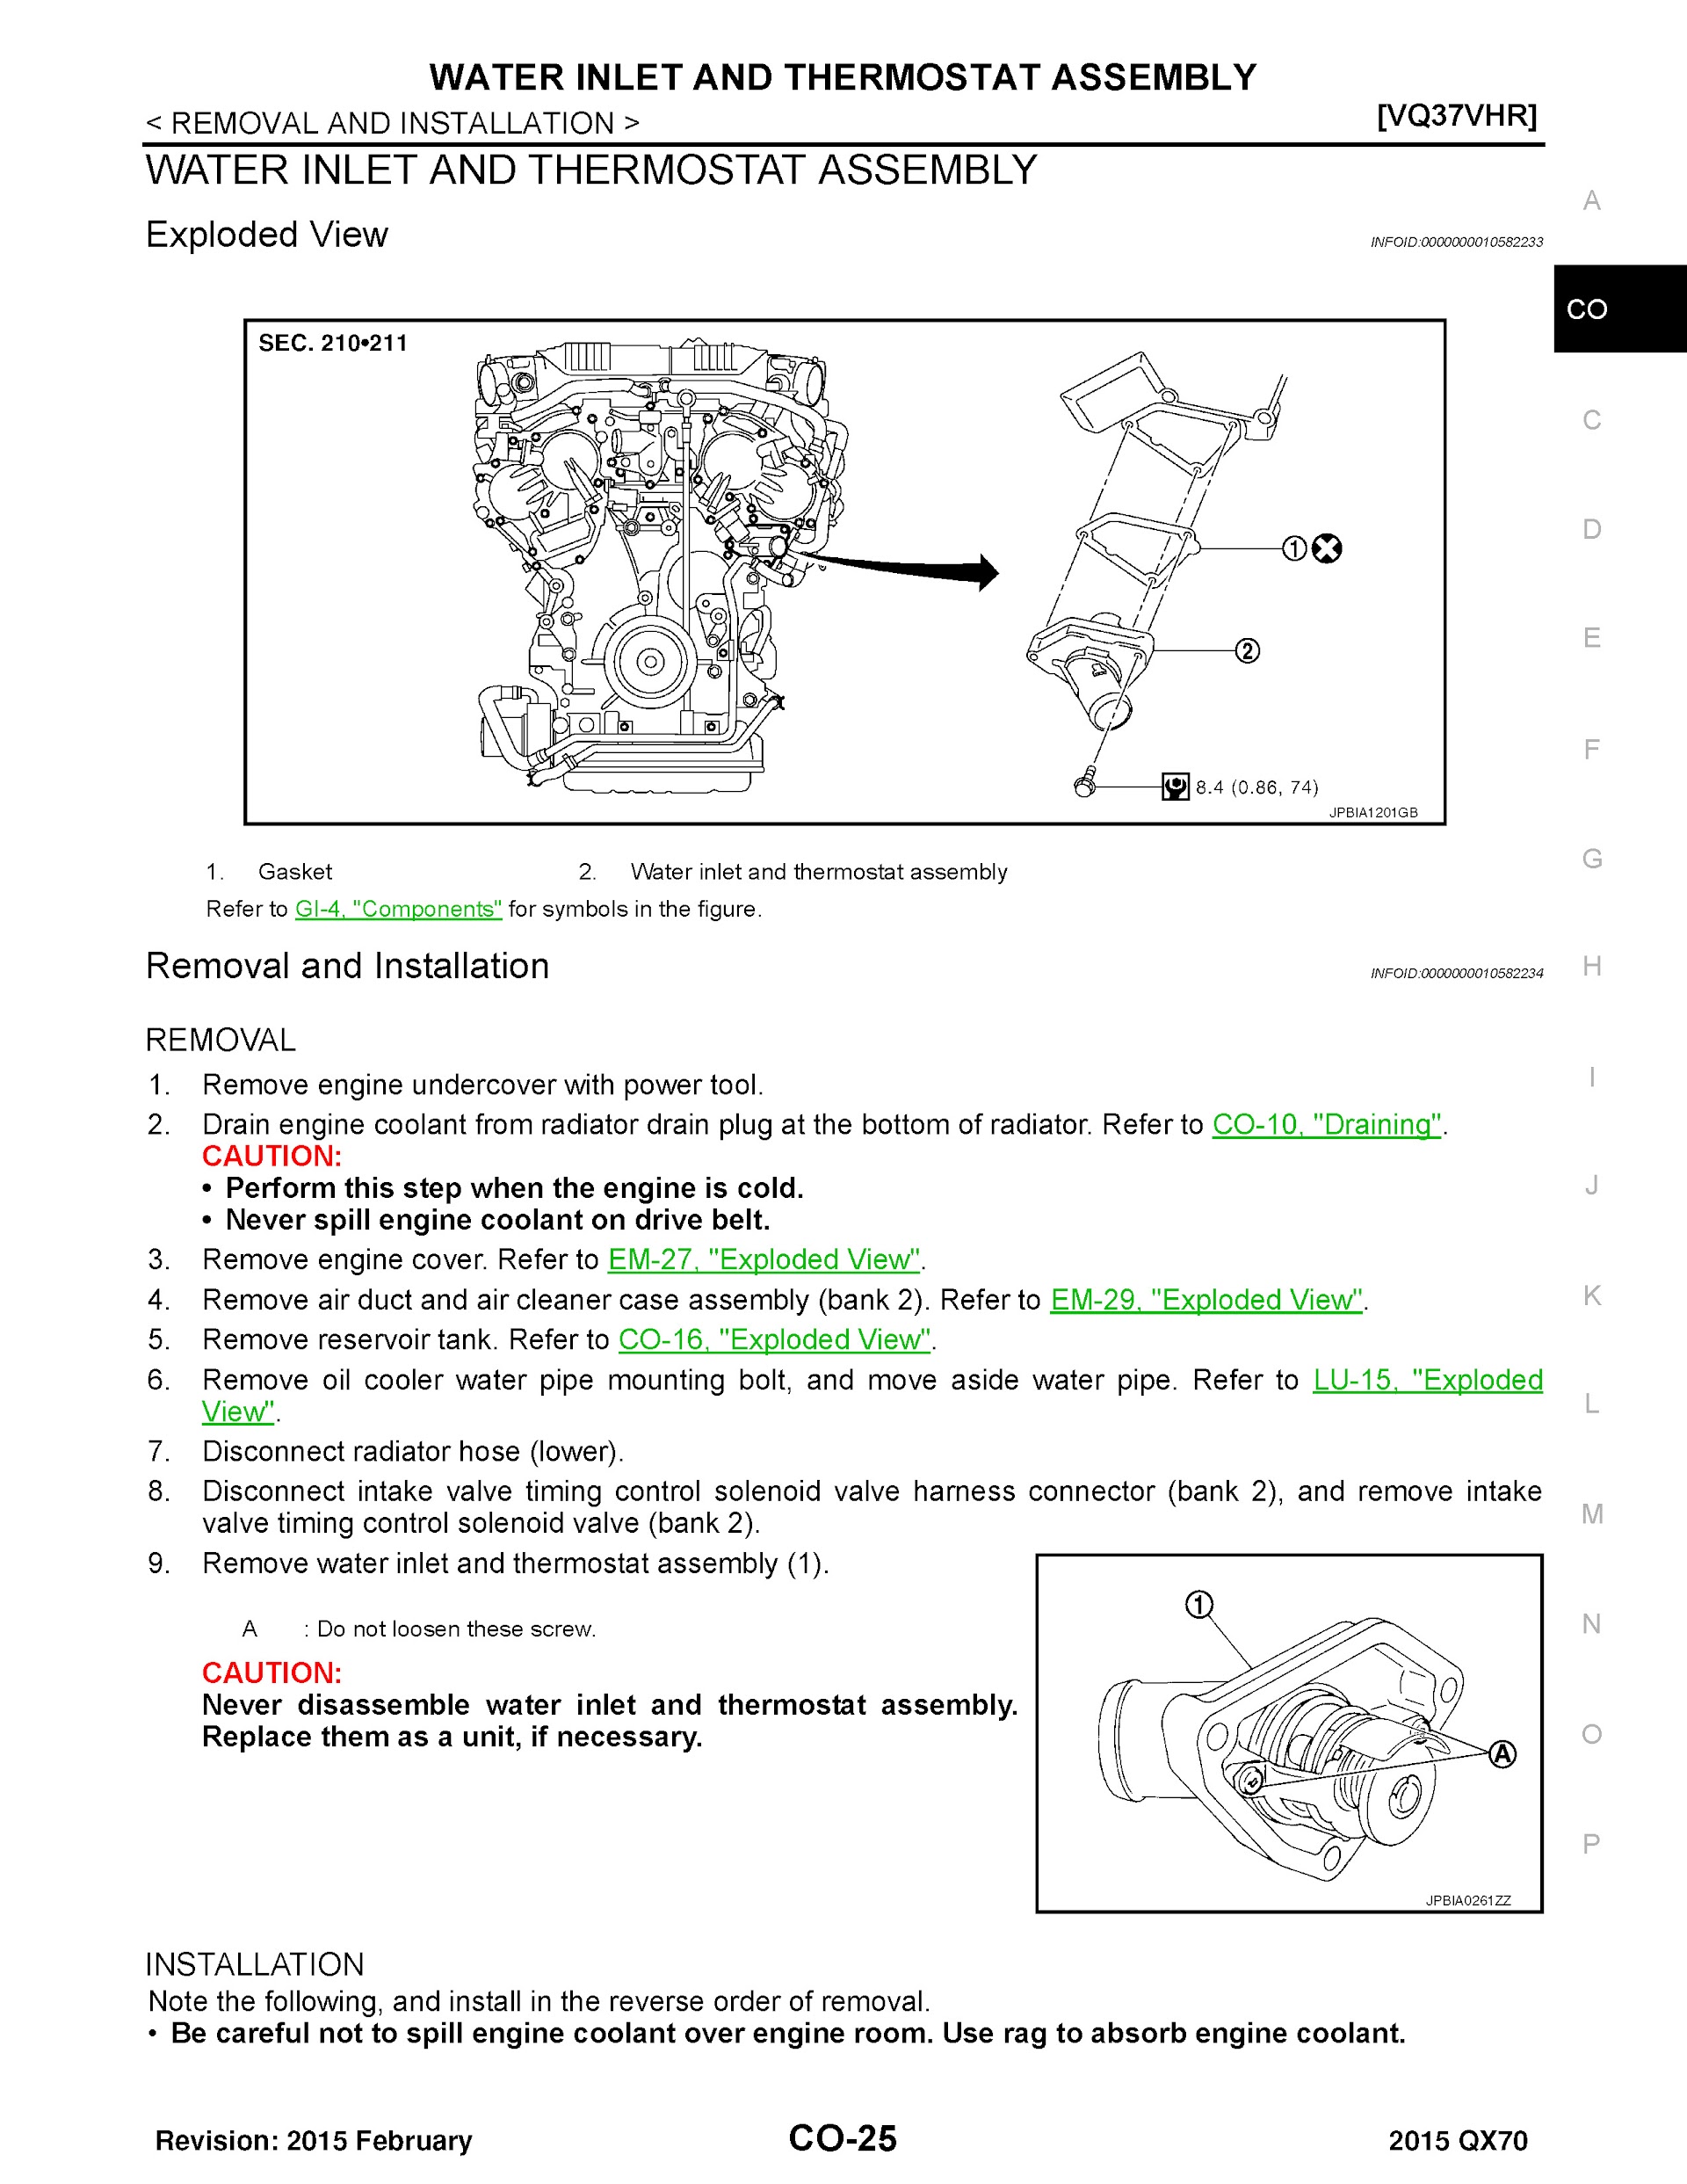 2015 Infiniti QX70 Repair Manual, Water Inlet and Themostat Assembly